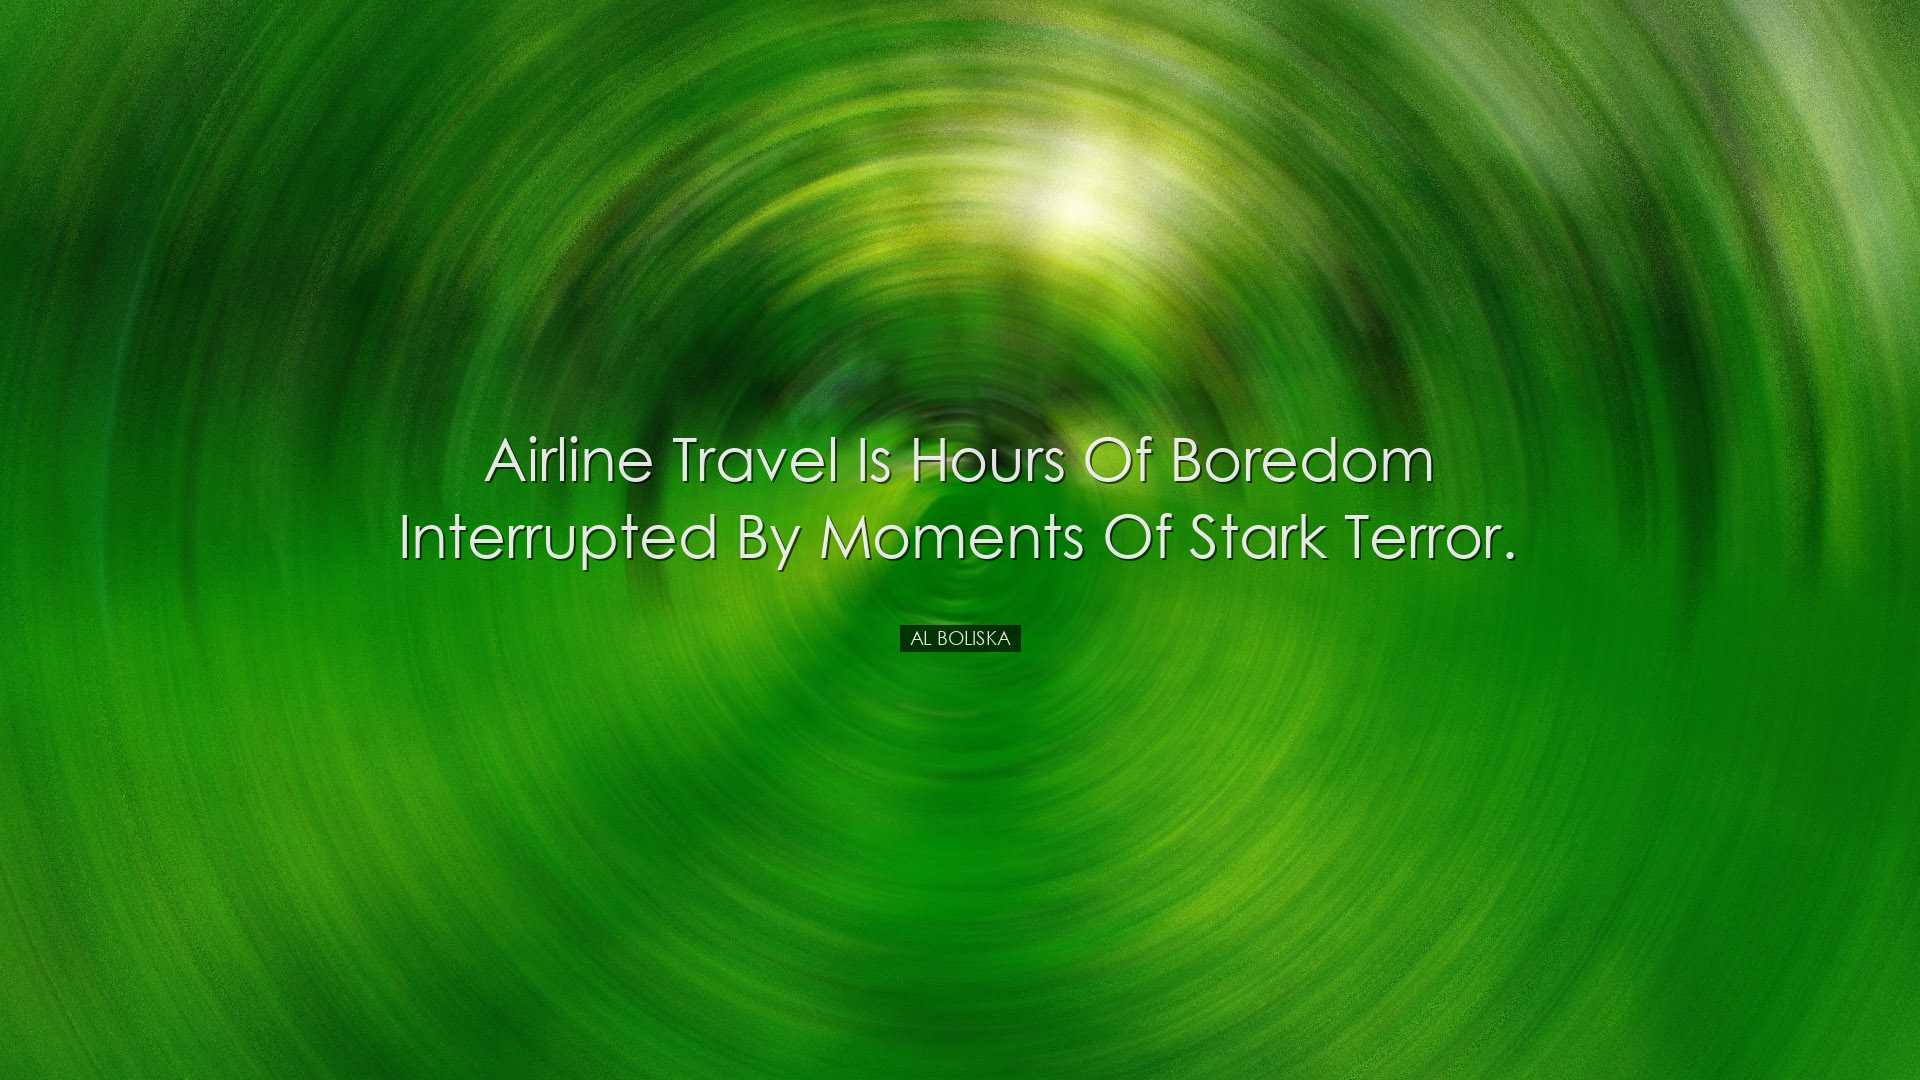 Airline travel is hours of boredom interrupted by moments of stark